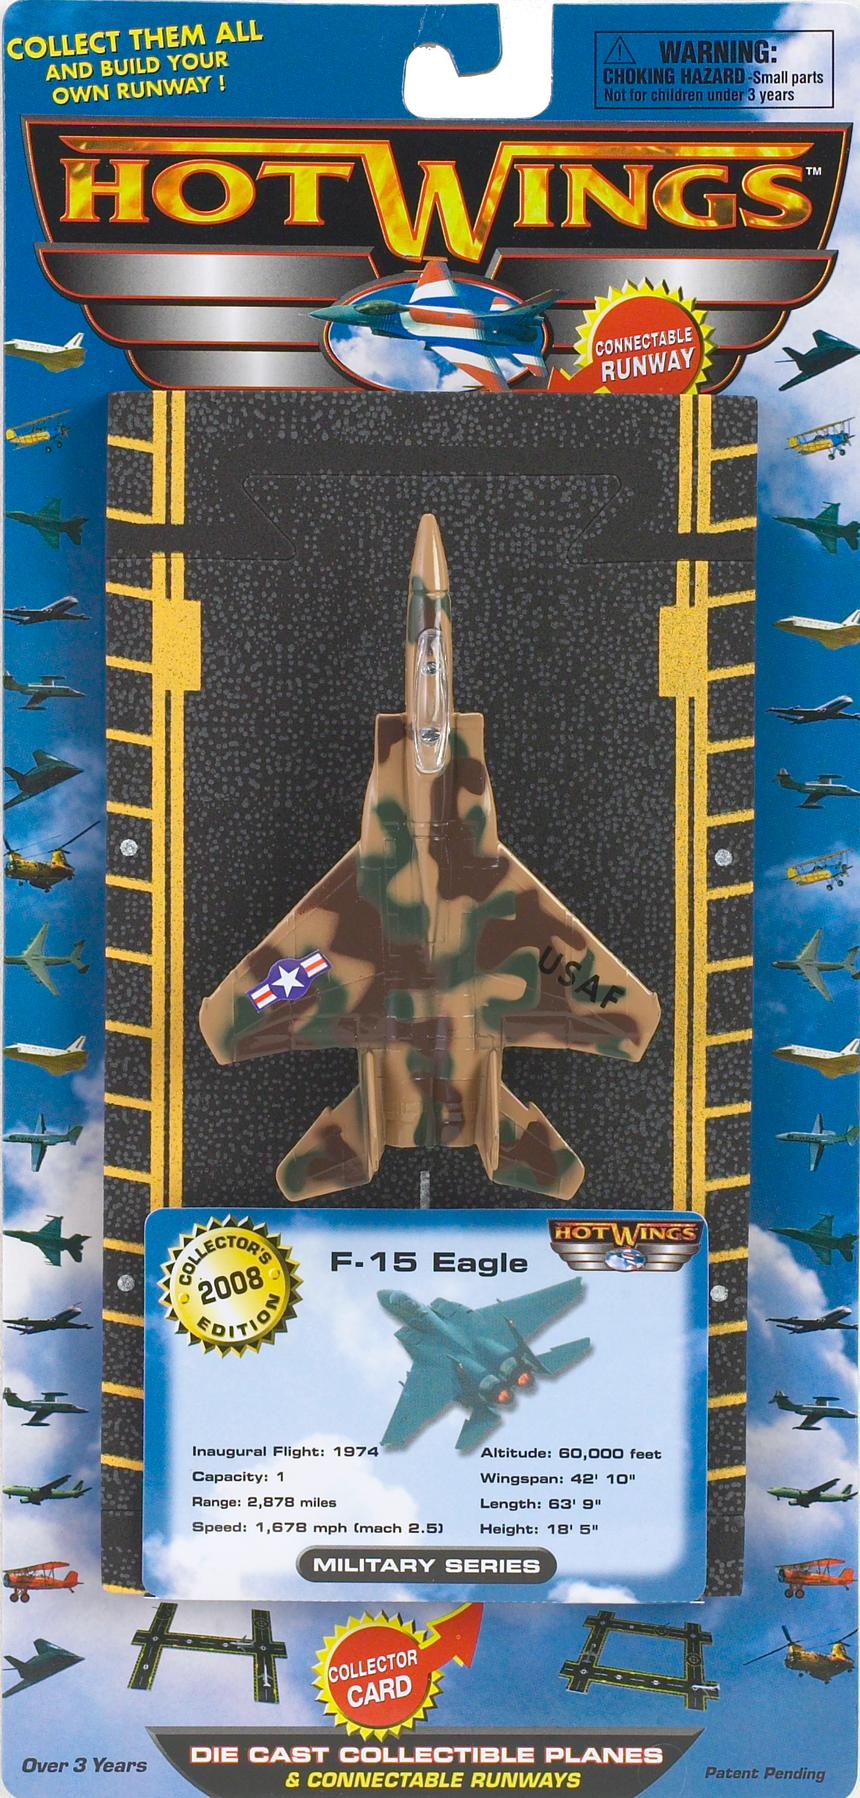 F-15 Eagle (with military markings)